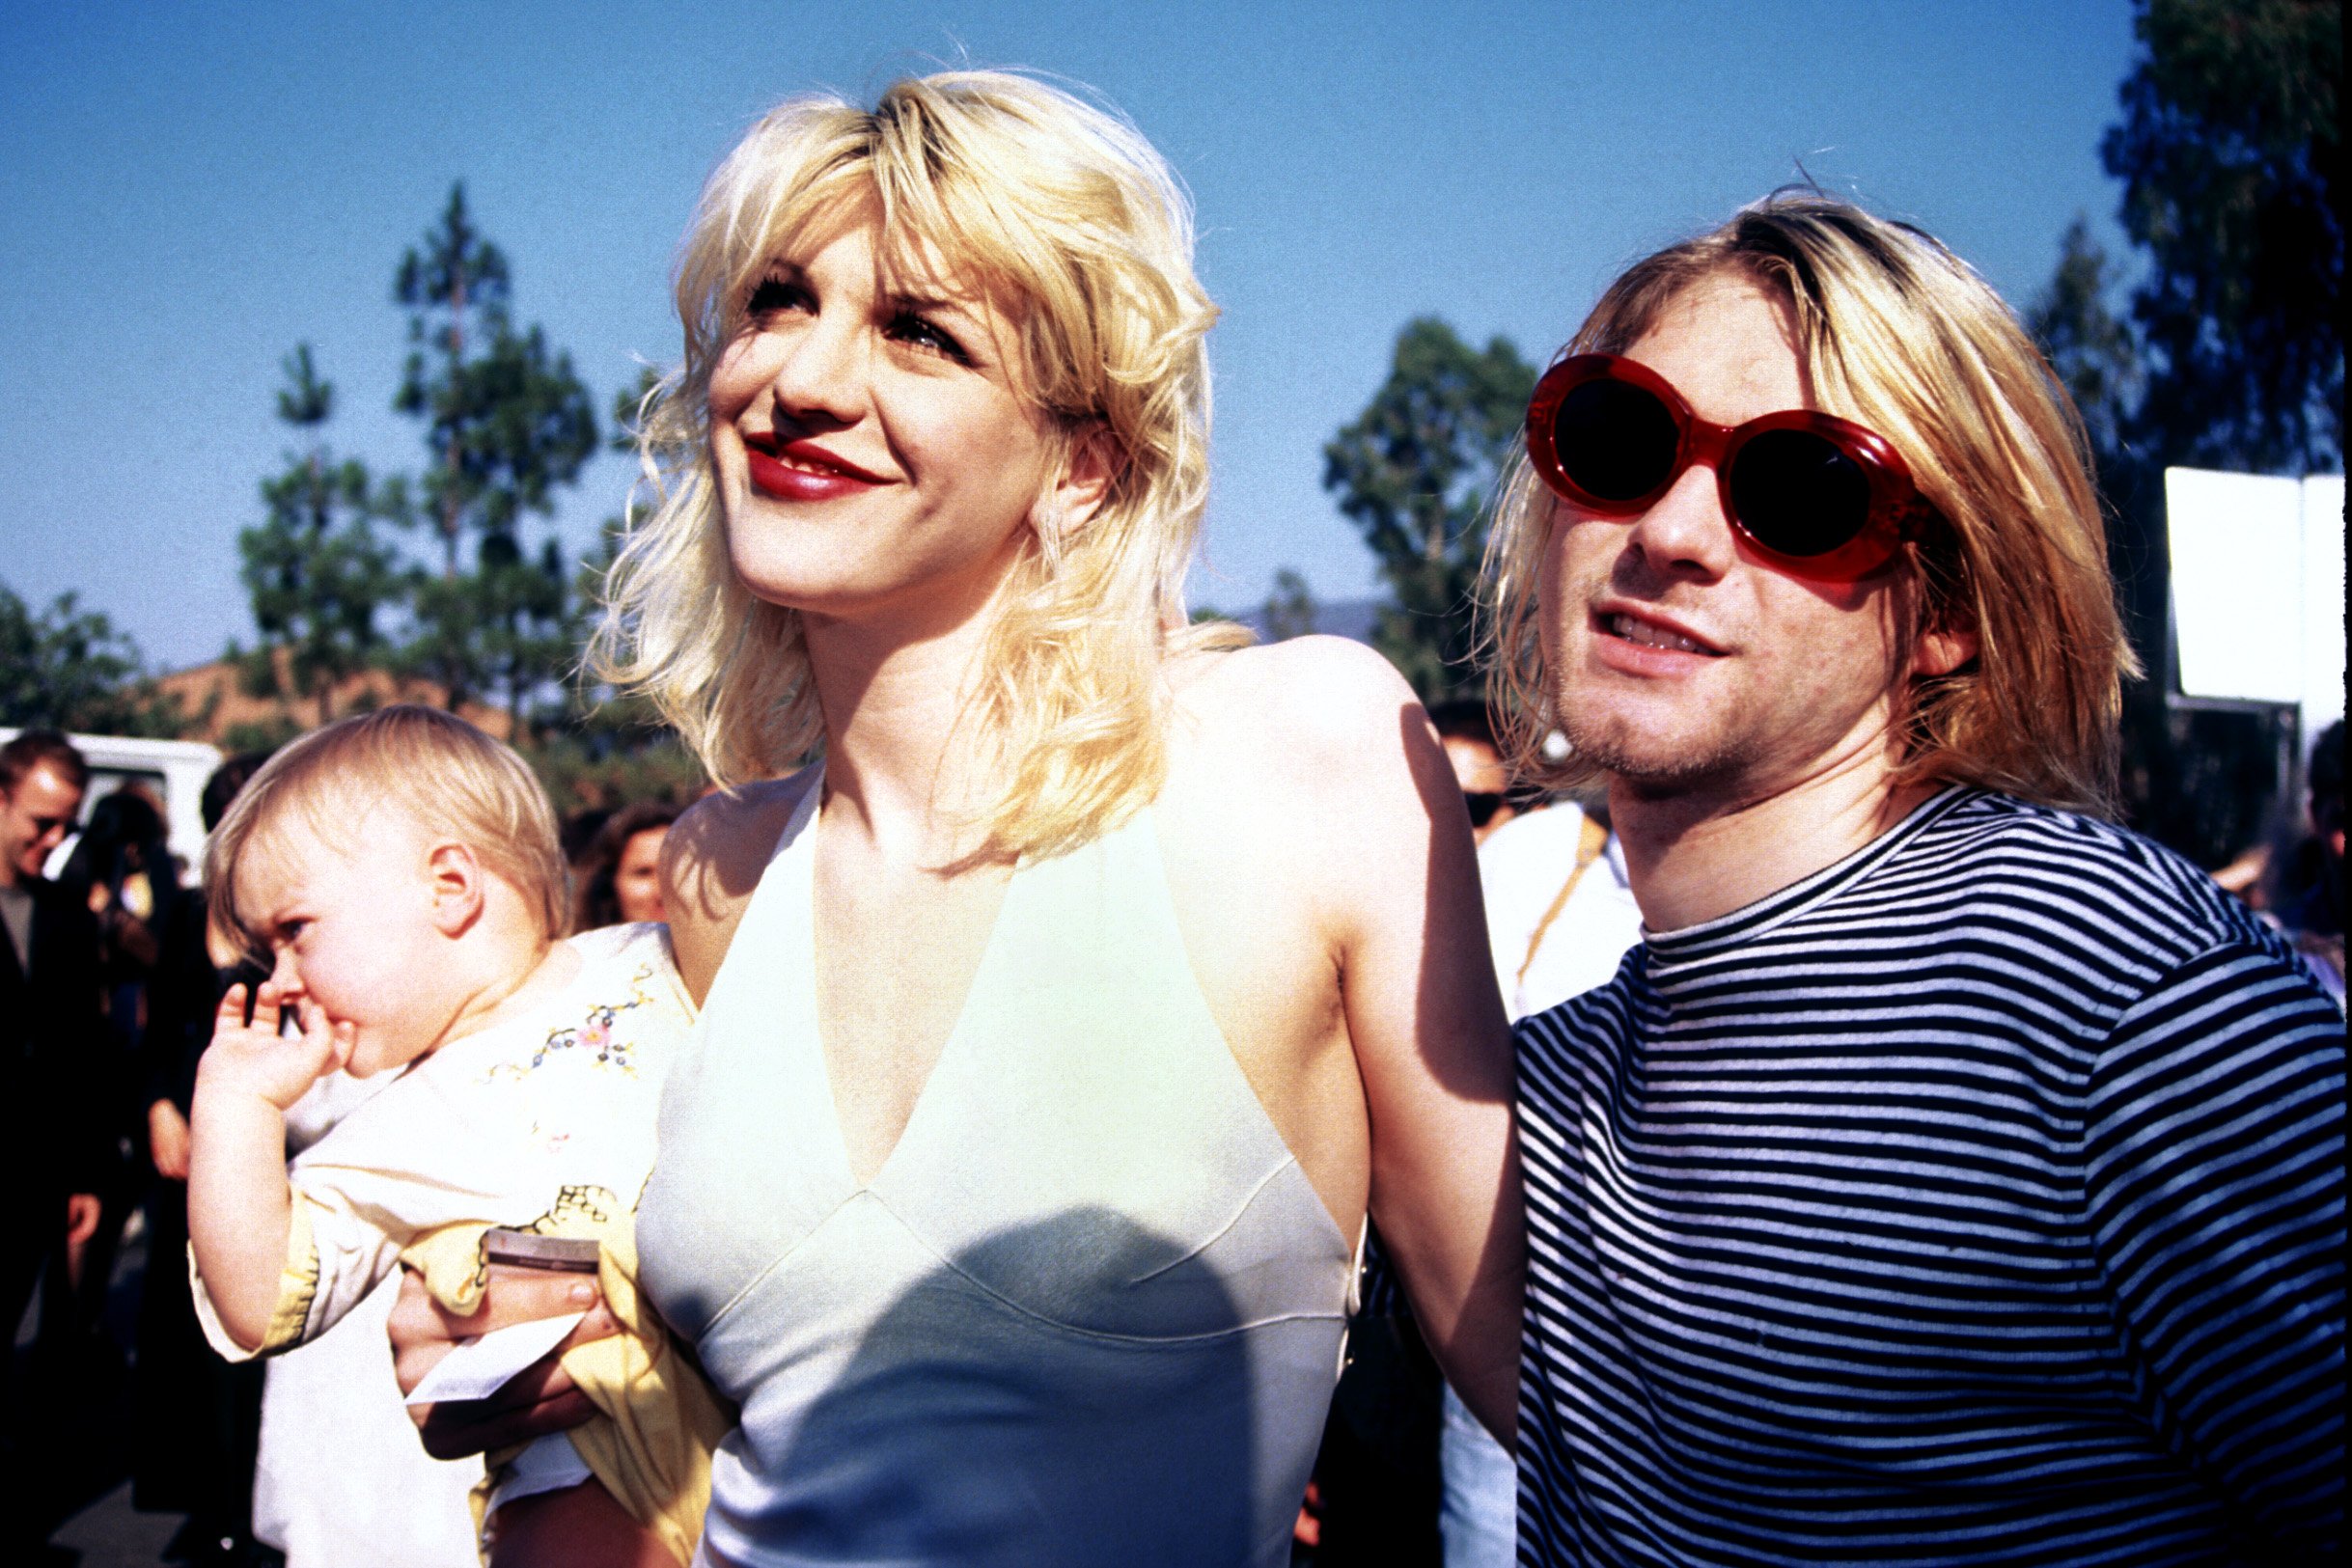 Kurt Cobain, Courtney Love and baby Frances Bean at the 1993 MTV Music Video Awards in Los Angeles on September 2, 1993. | Source: Getty Images